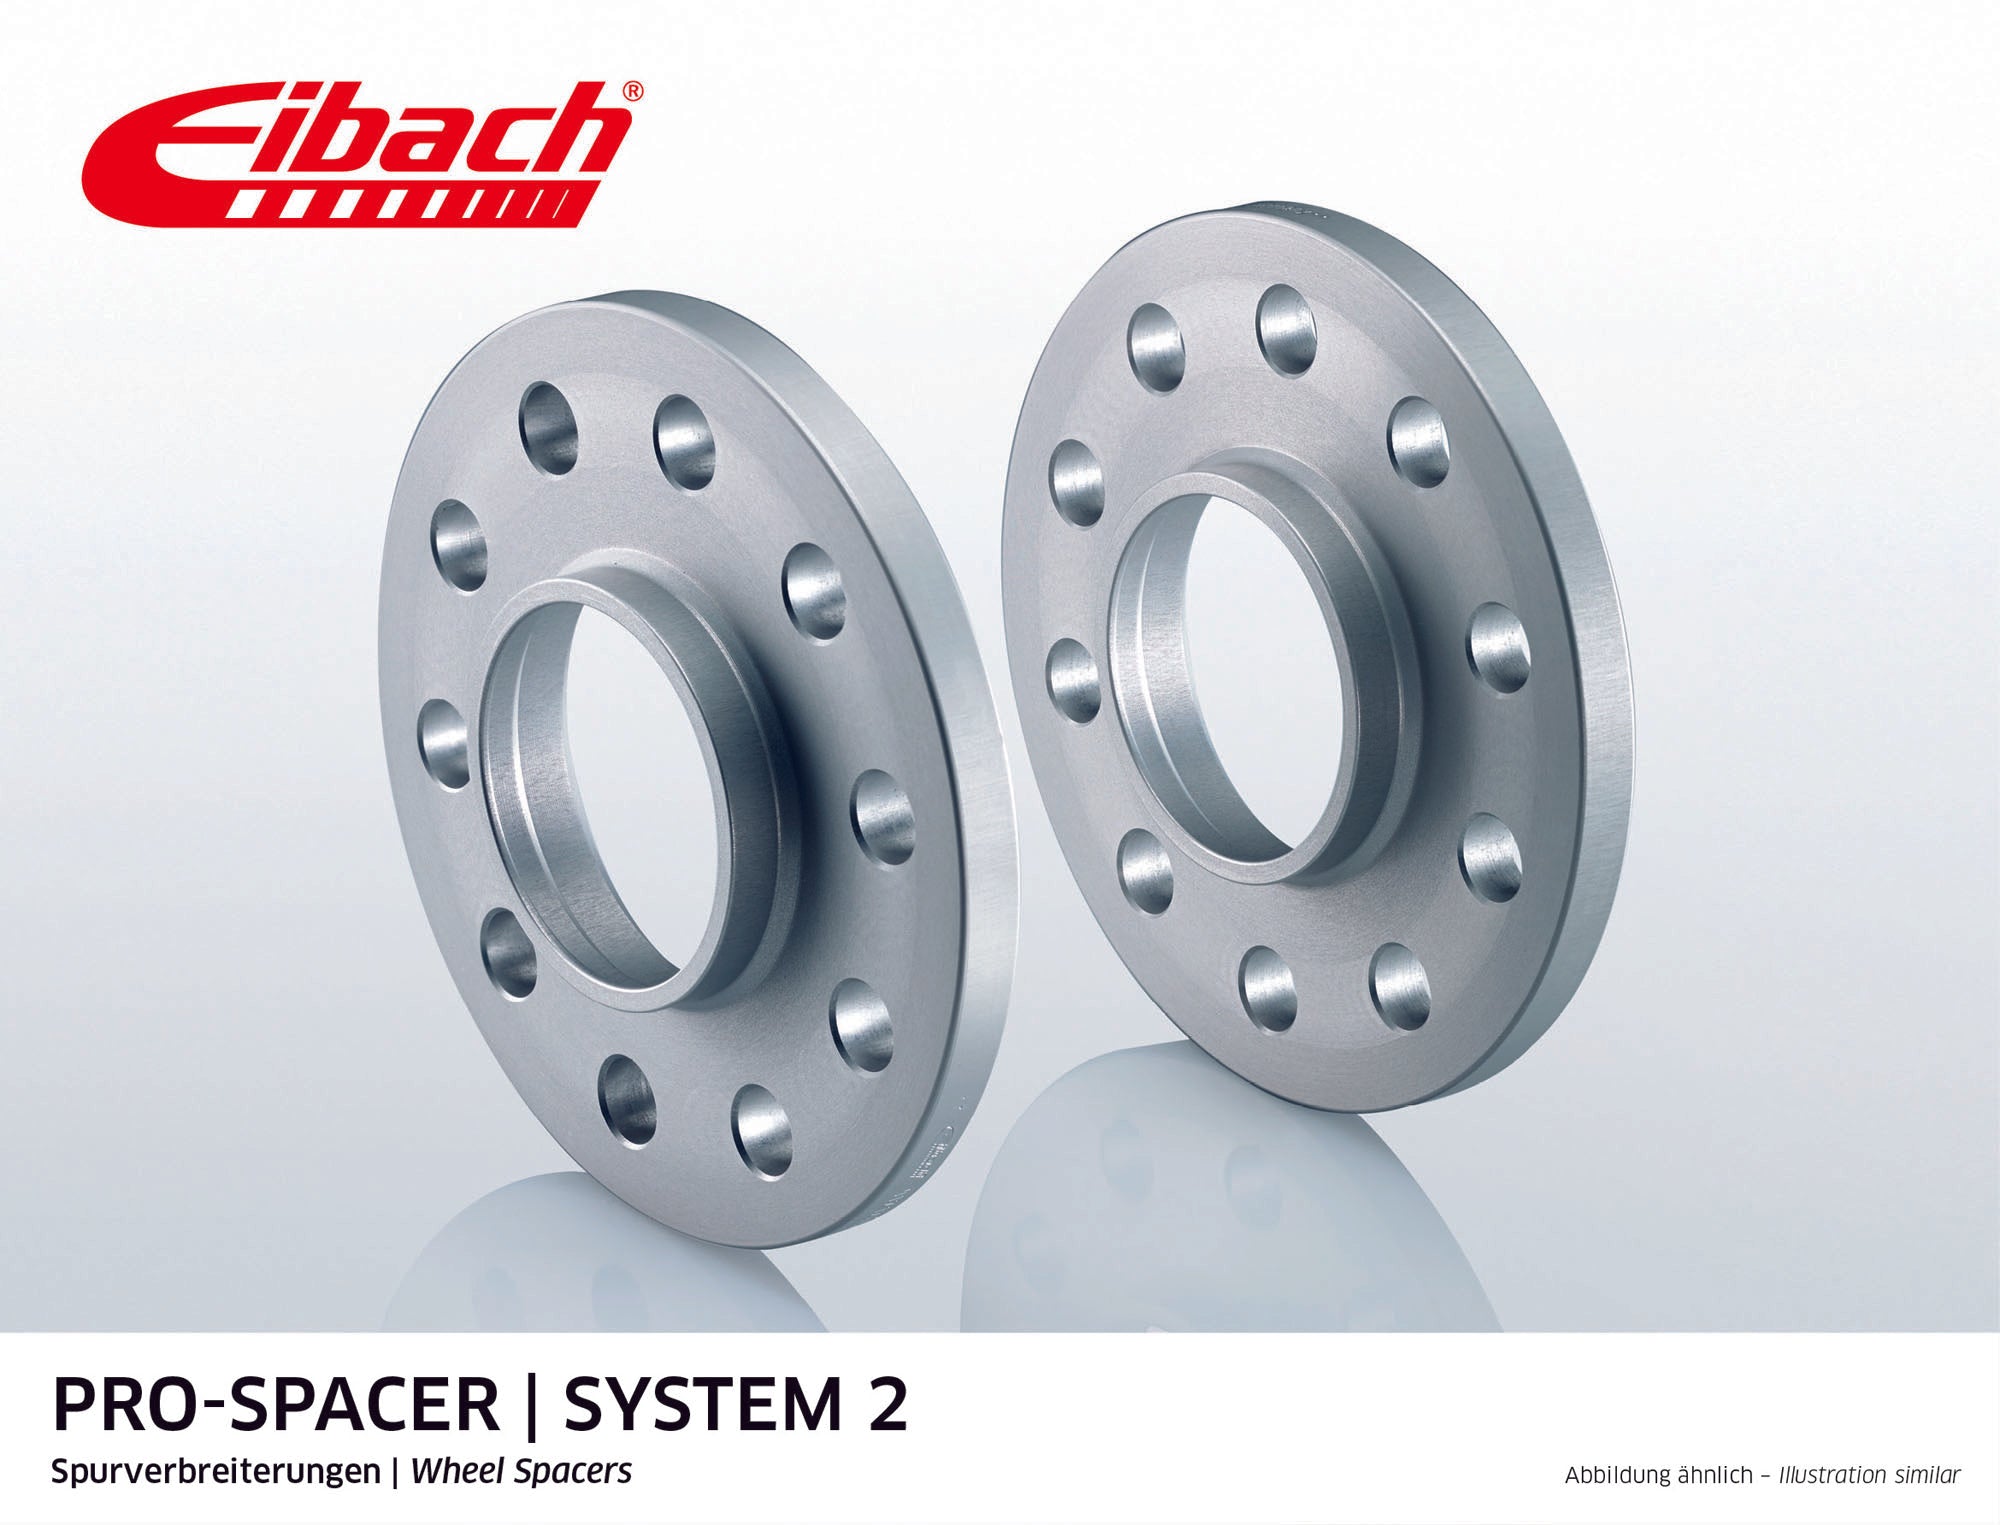 Eibach 15mm Pro-Spacer - Silver Anodized Wheel Spacer CAYENNE 2002-10 #S90-2-15-018